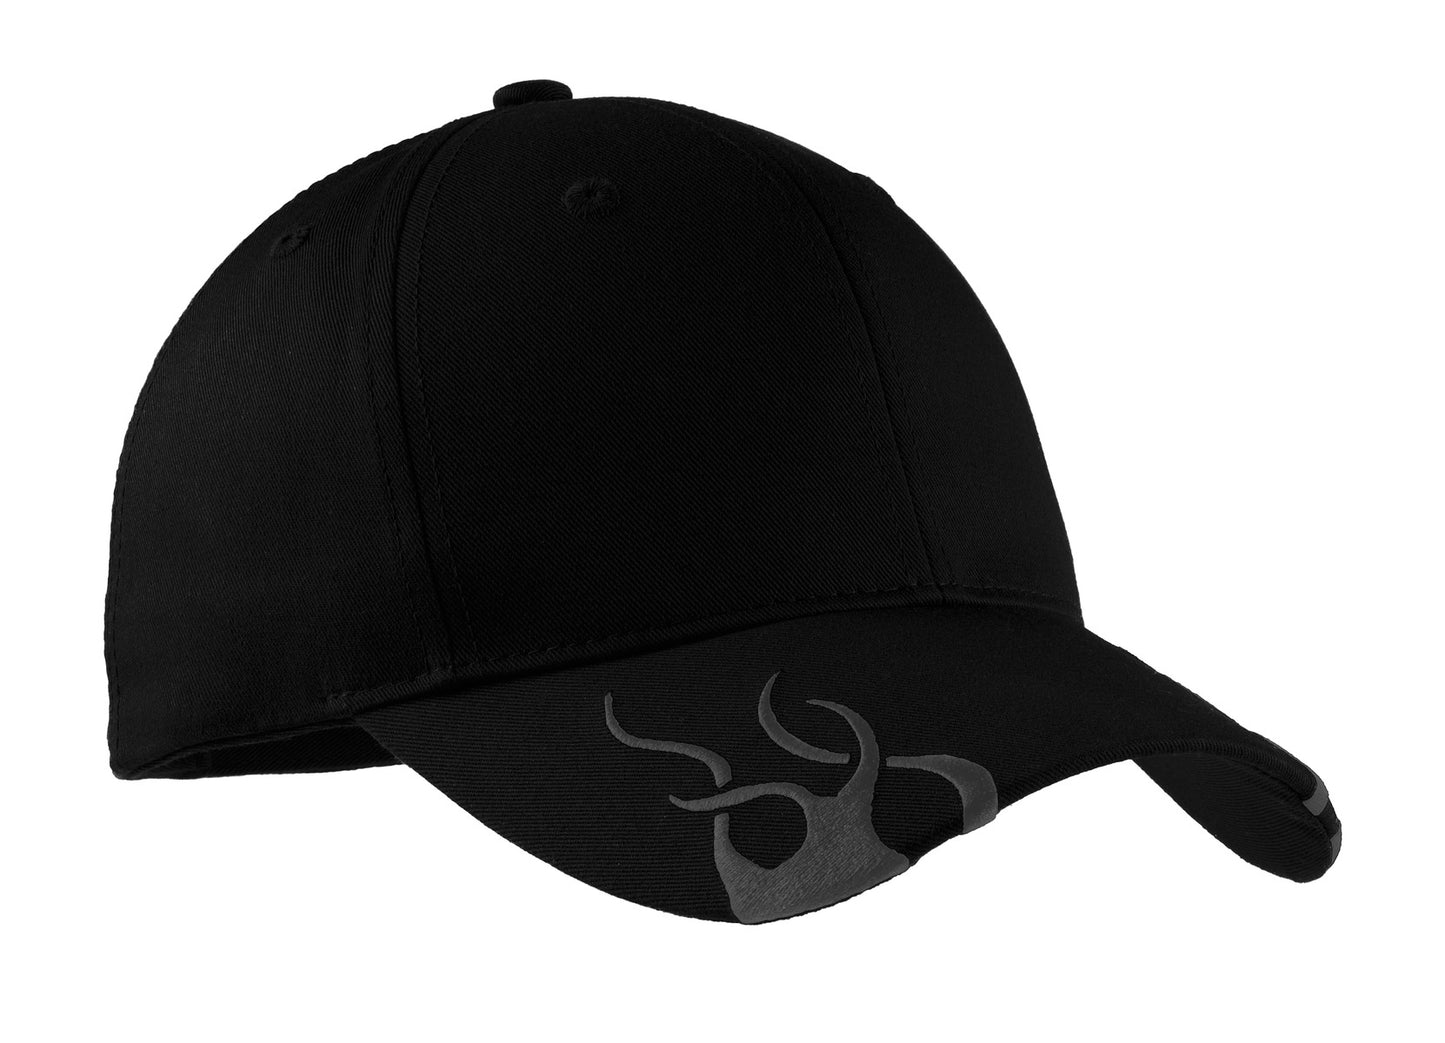 Port Authority Racing Cap with Flames. C857